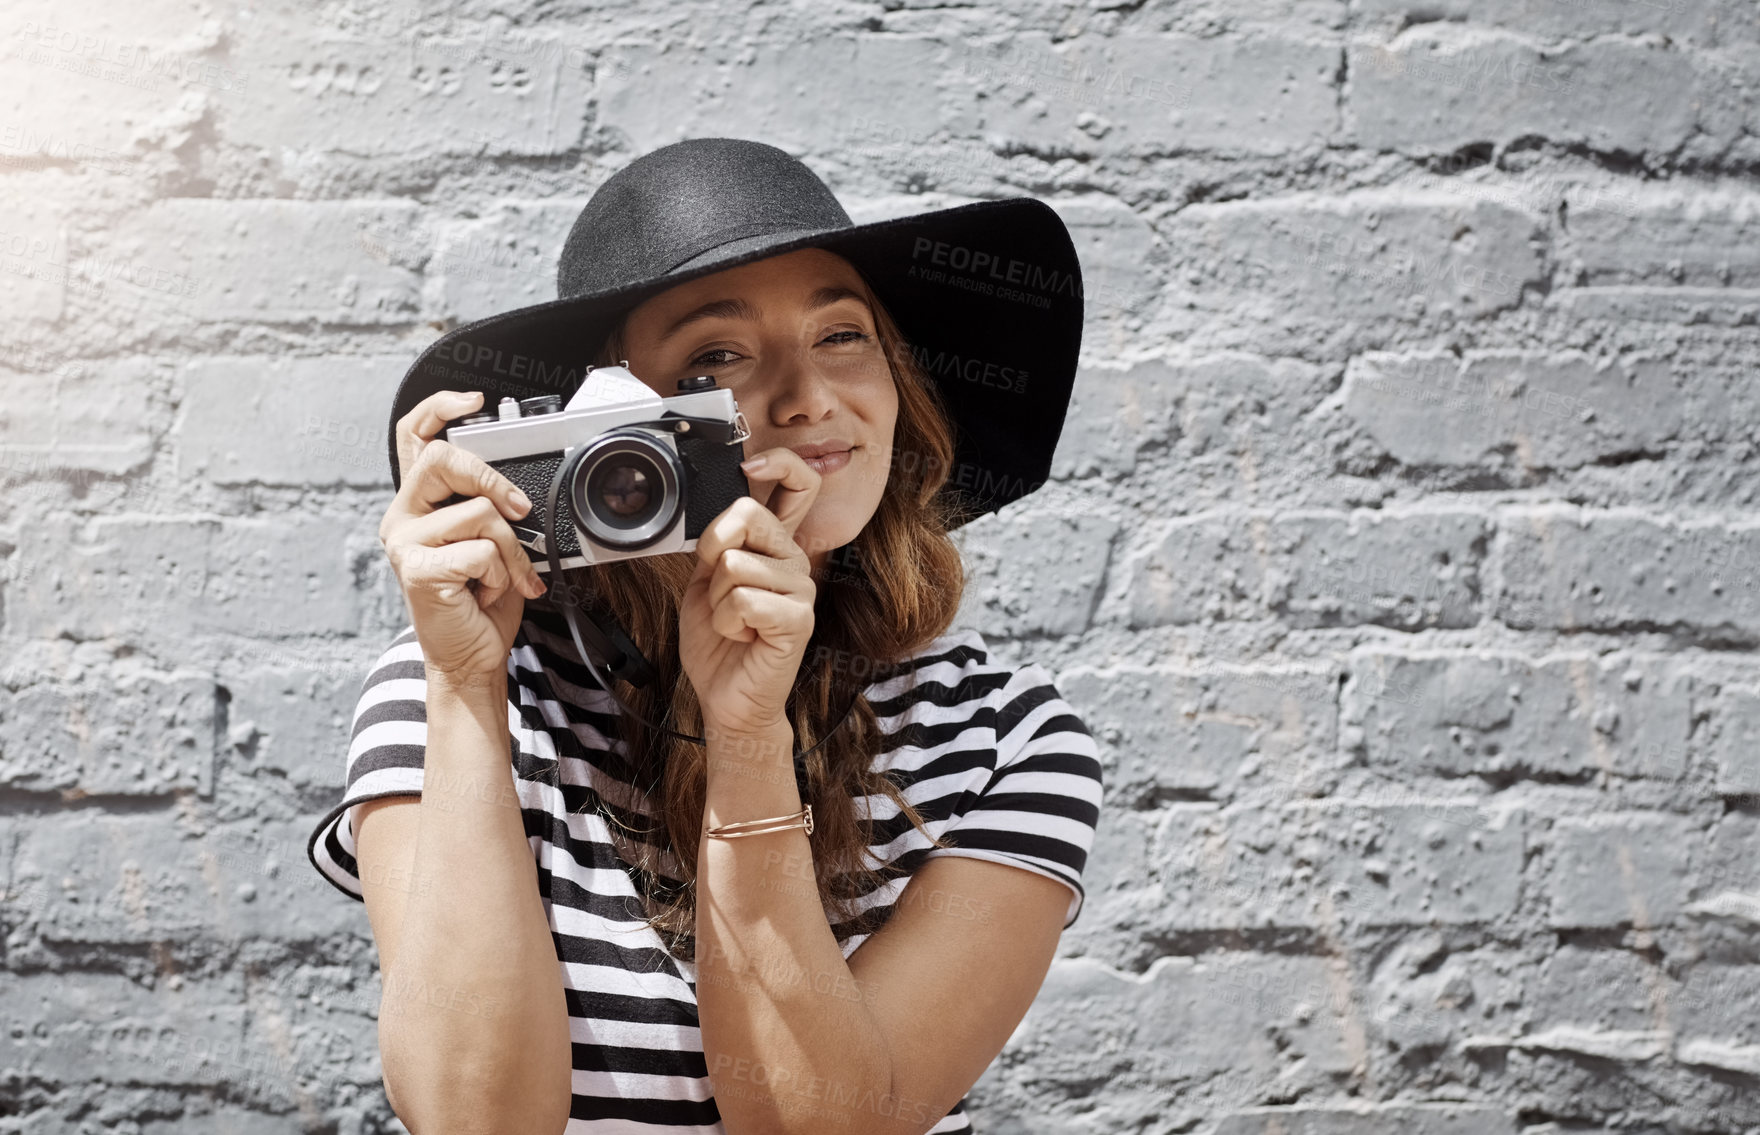 Buy stock photo Shot of a young woman taking a picture with her camera against a brick wall outdoors